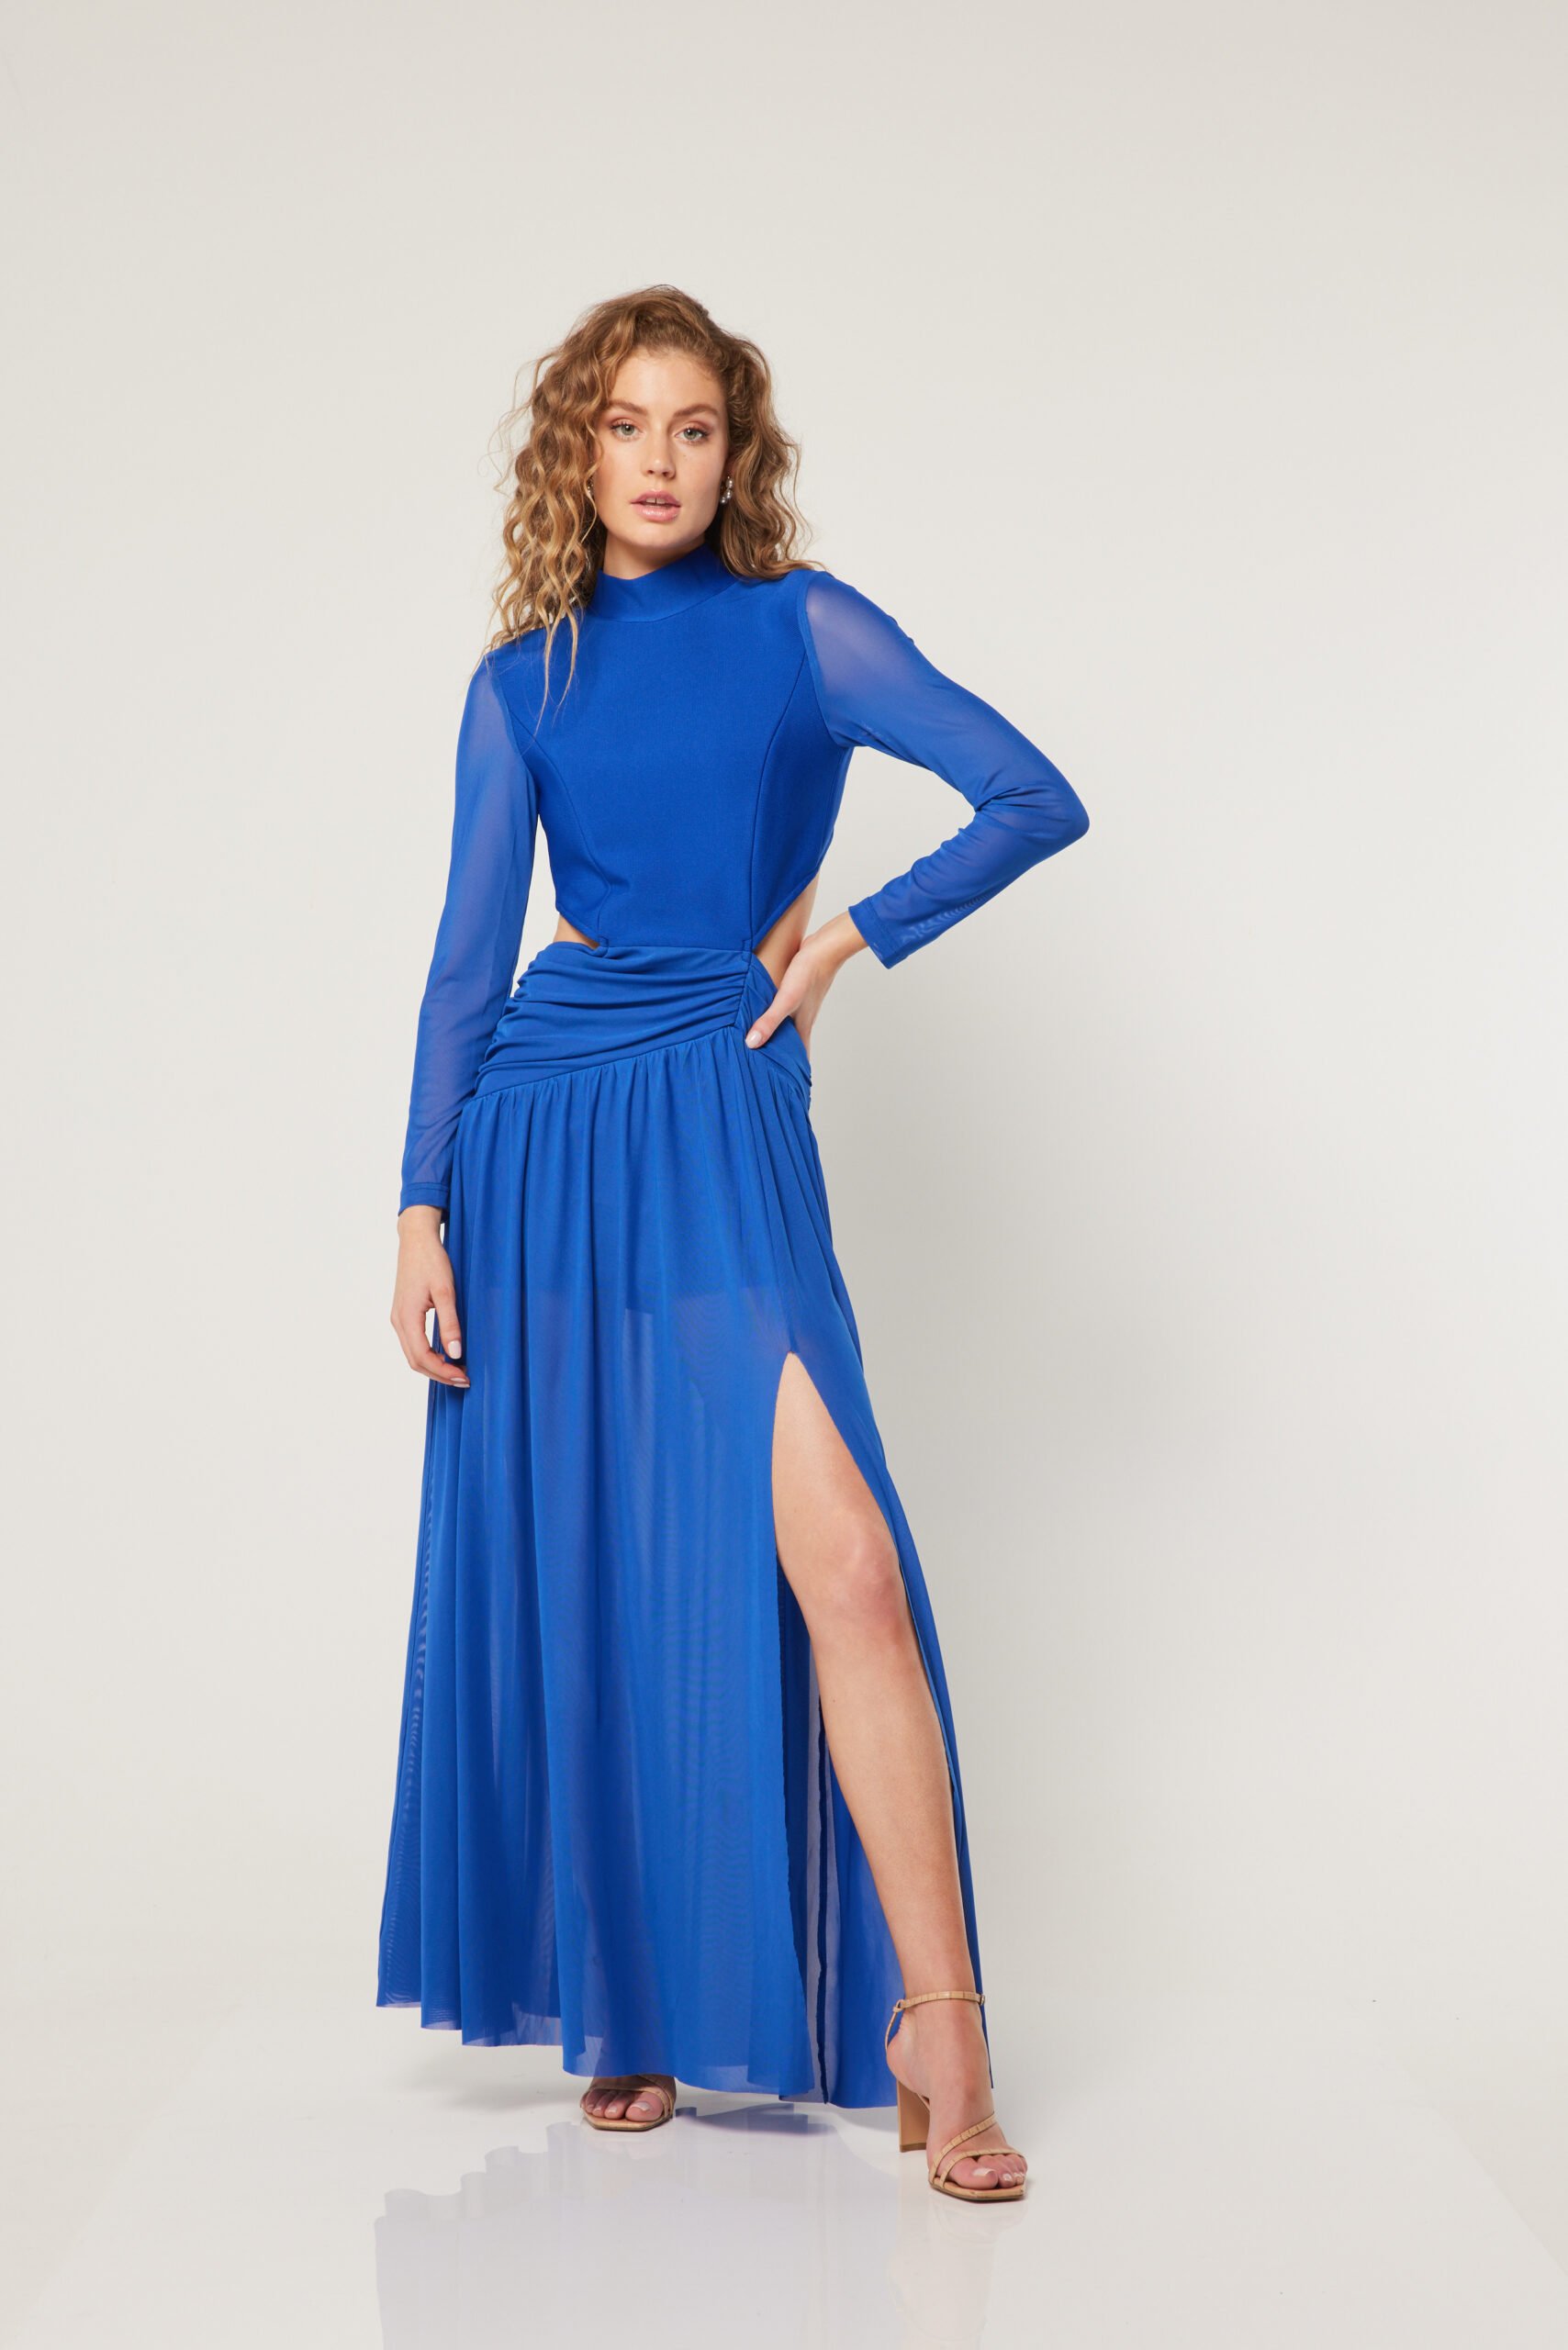 Binti Boutique - Partywear, Formal, and Cocktail Dresses